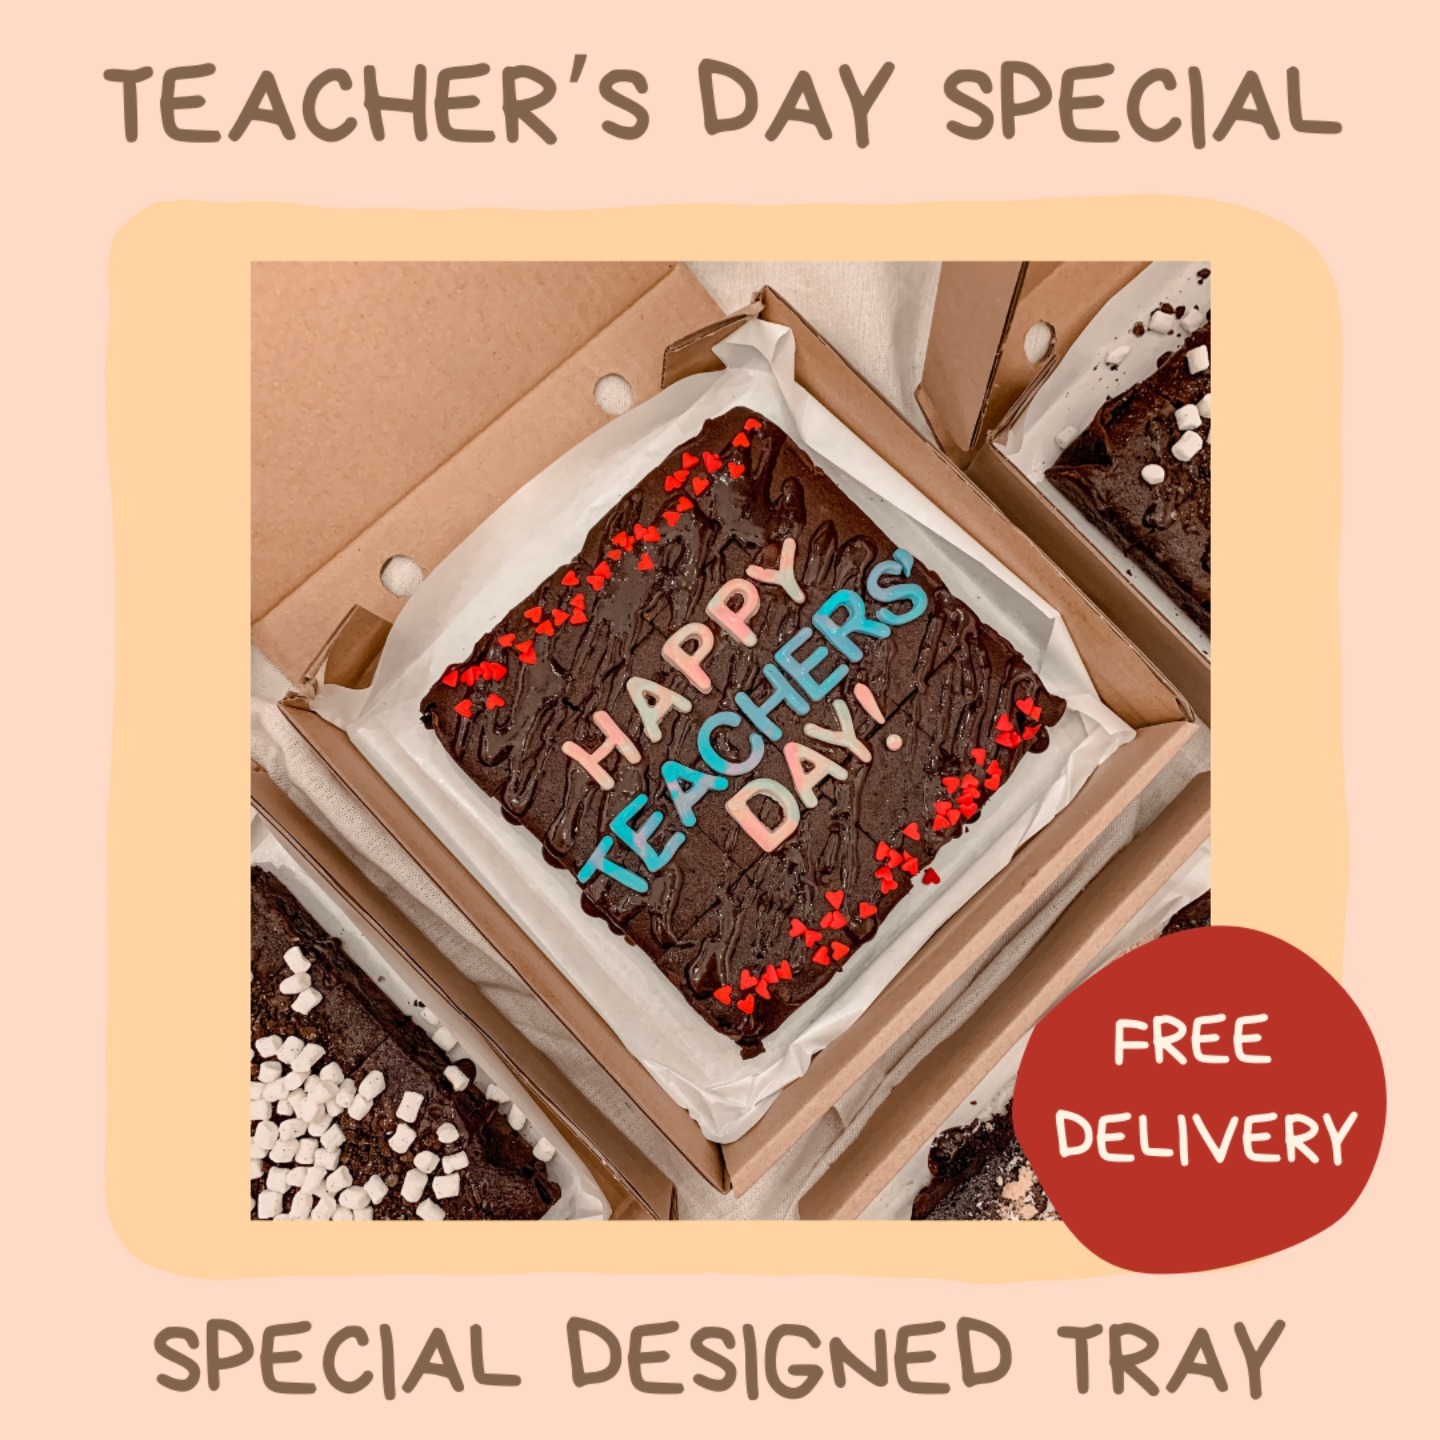 FREE DELIVERY TEACHERS DAY SPECIAL TRAY